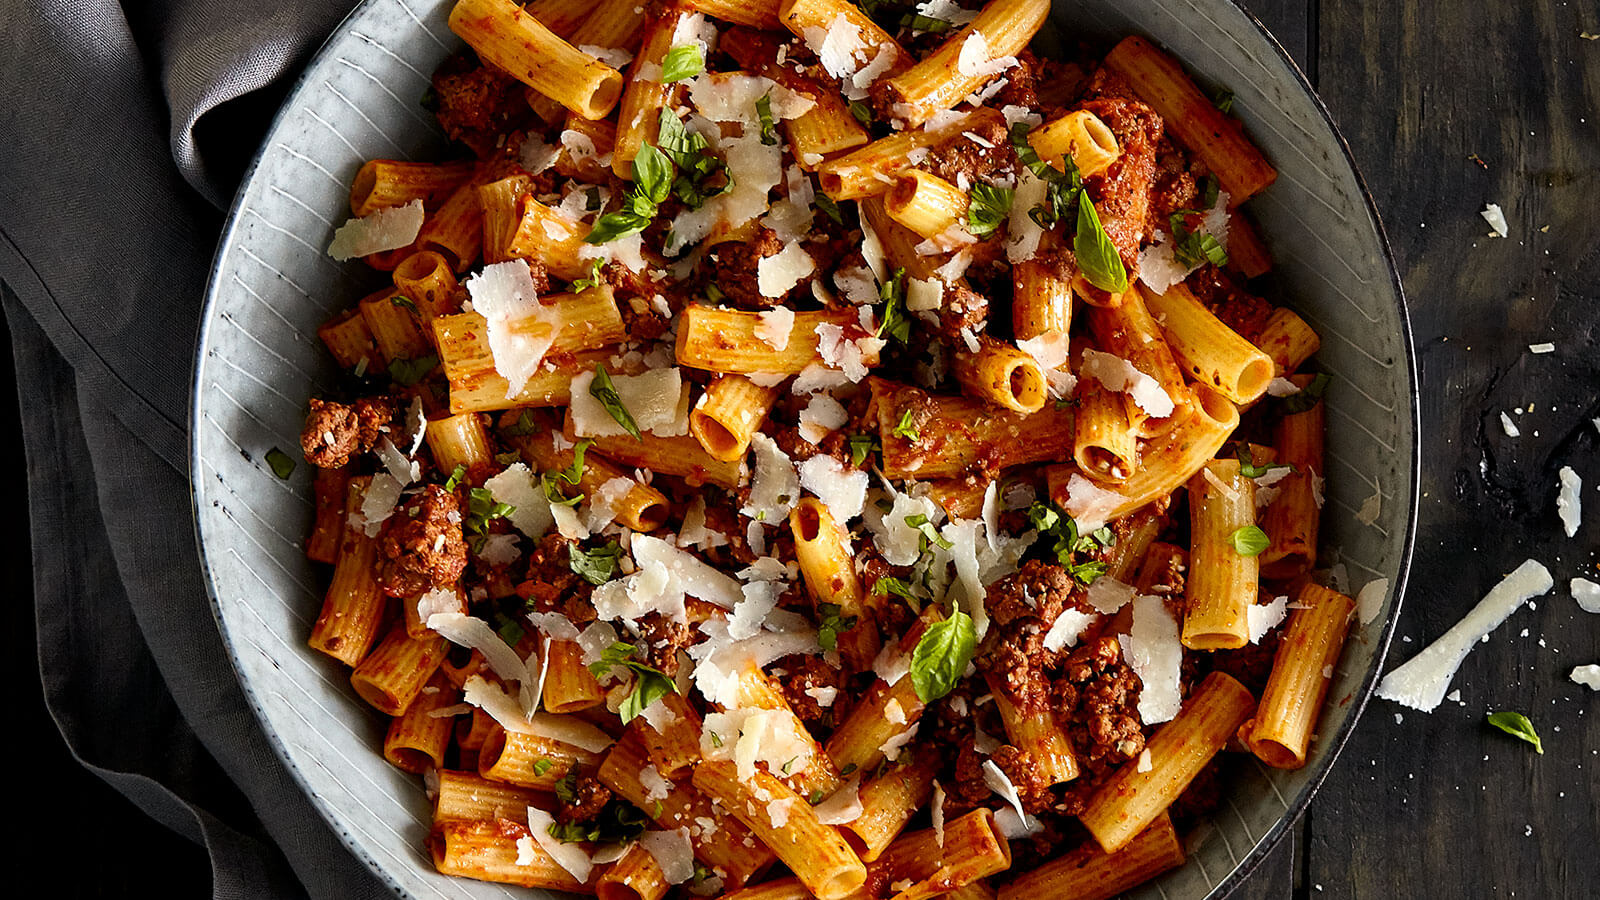 Rigatoni with Bolognese Sauce